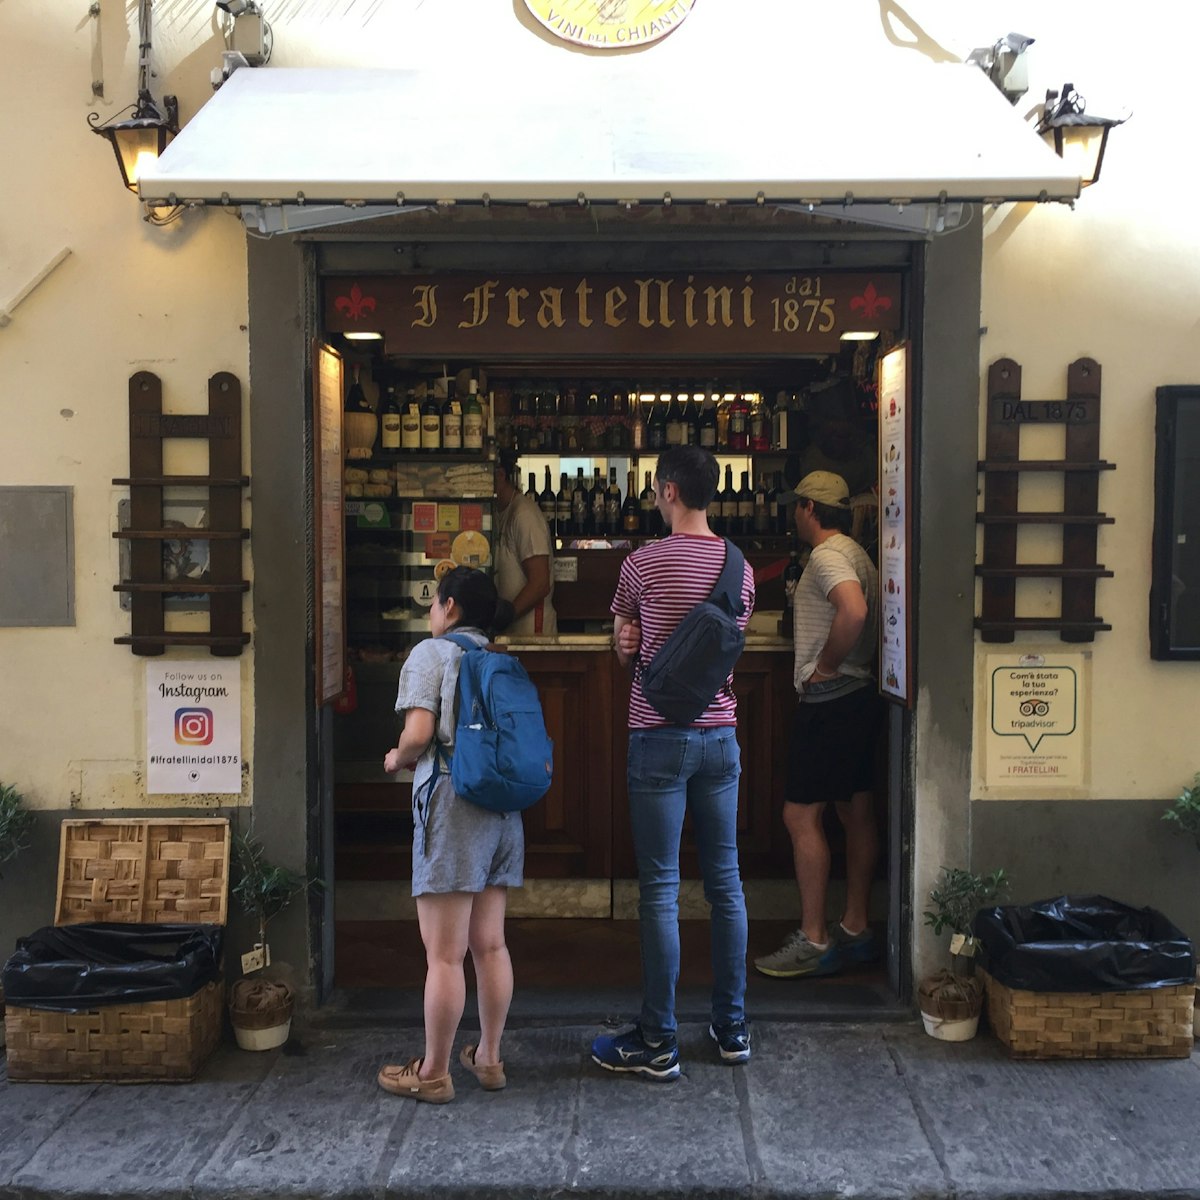 I Due Fratellini panino shop in Florence